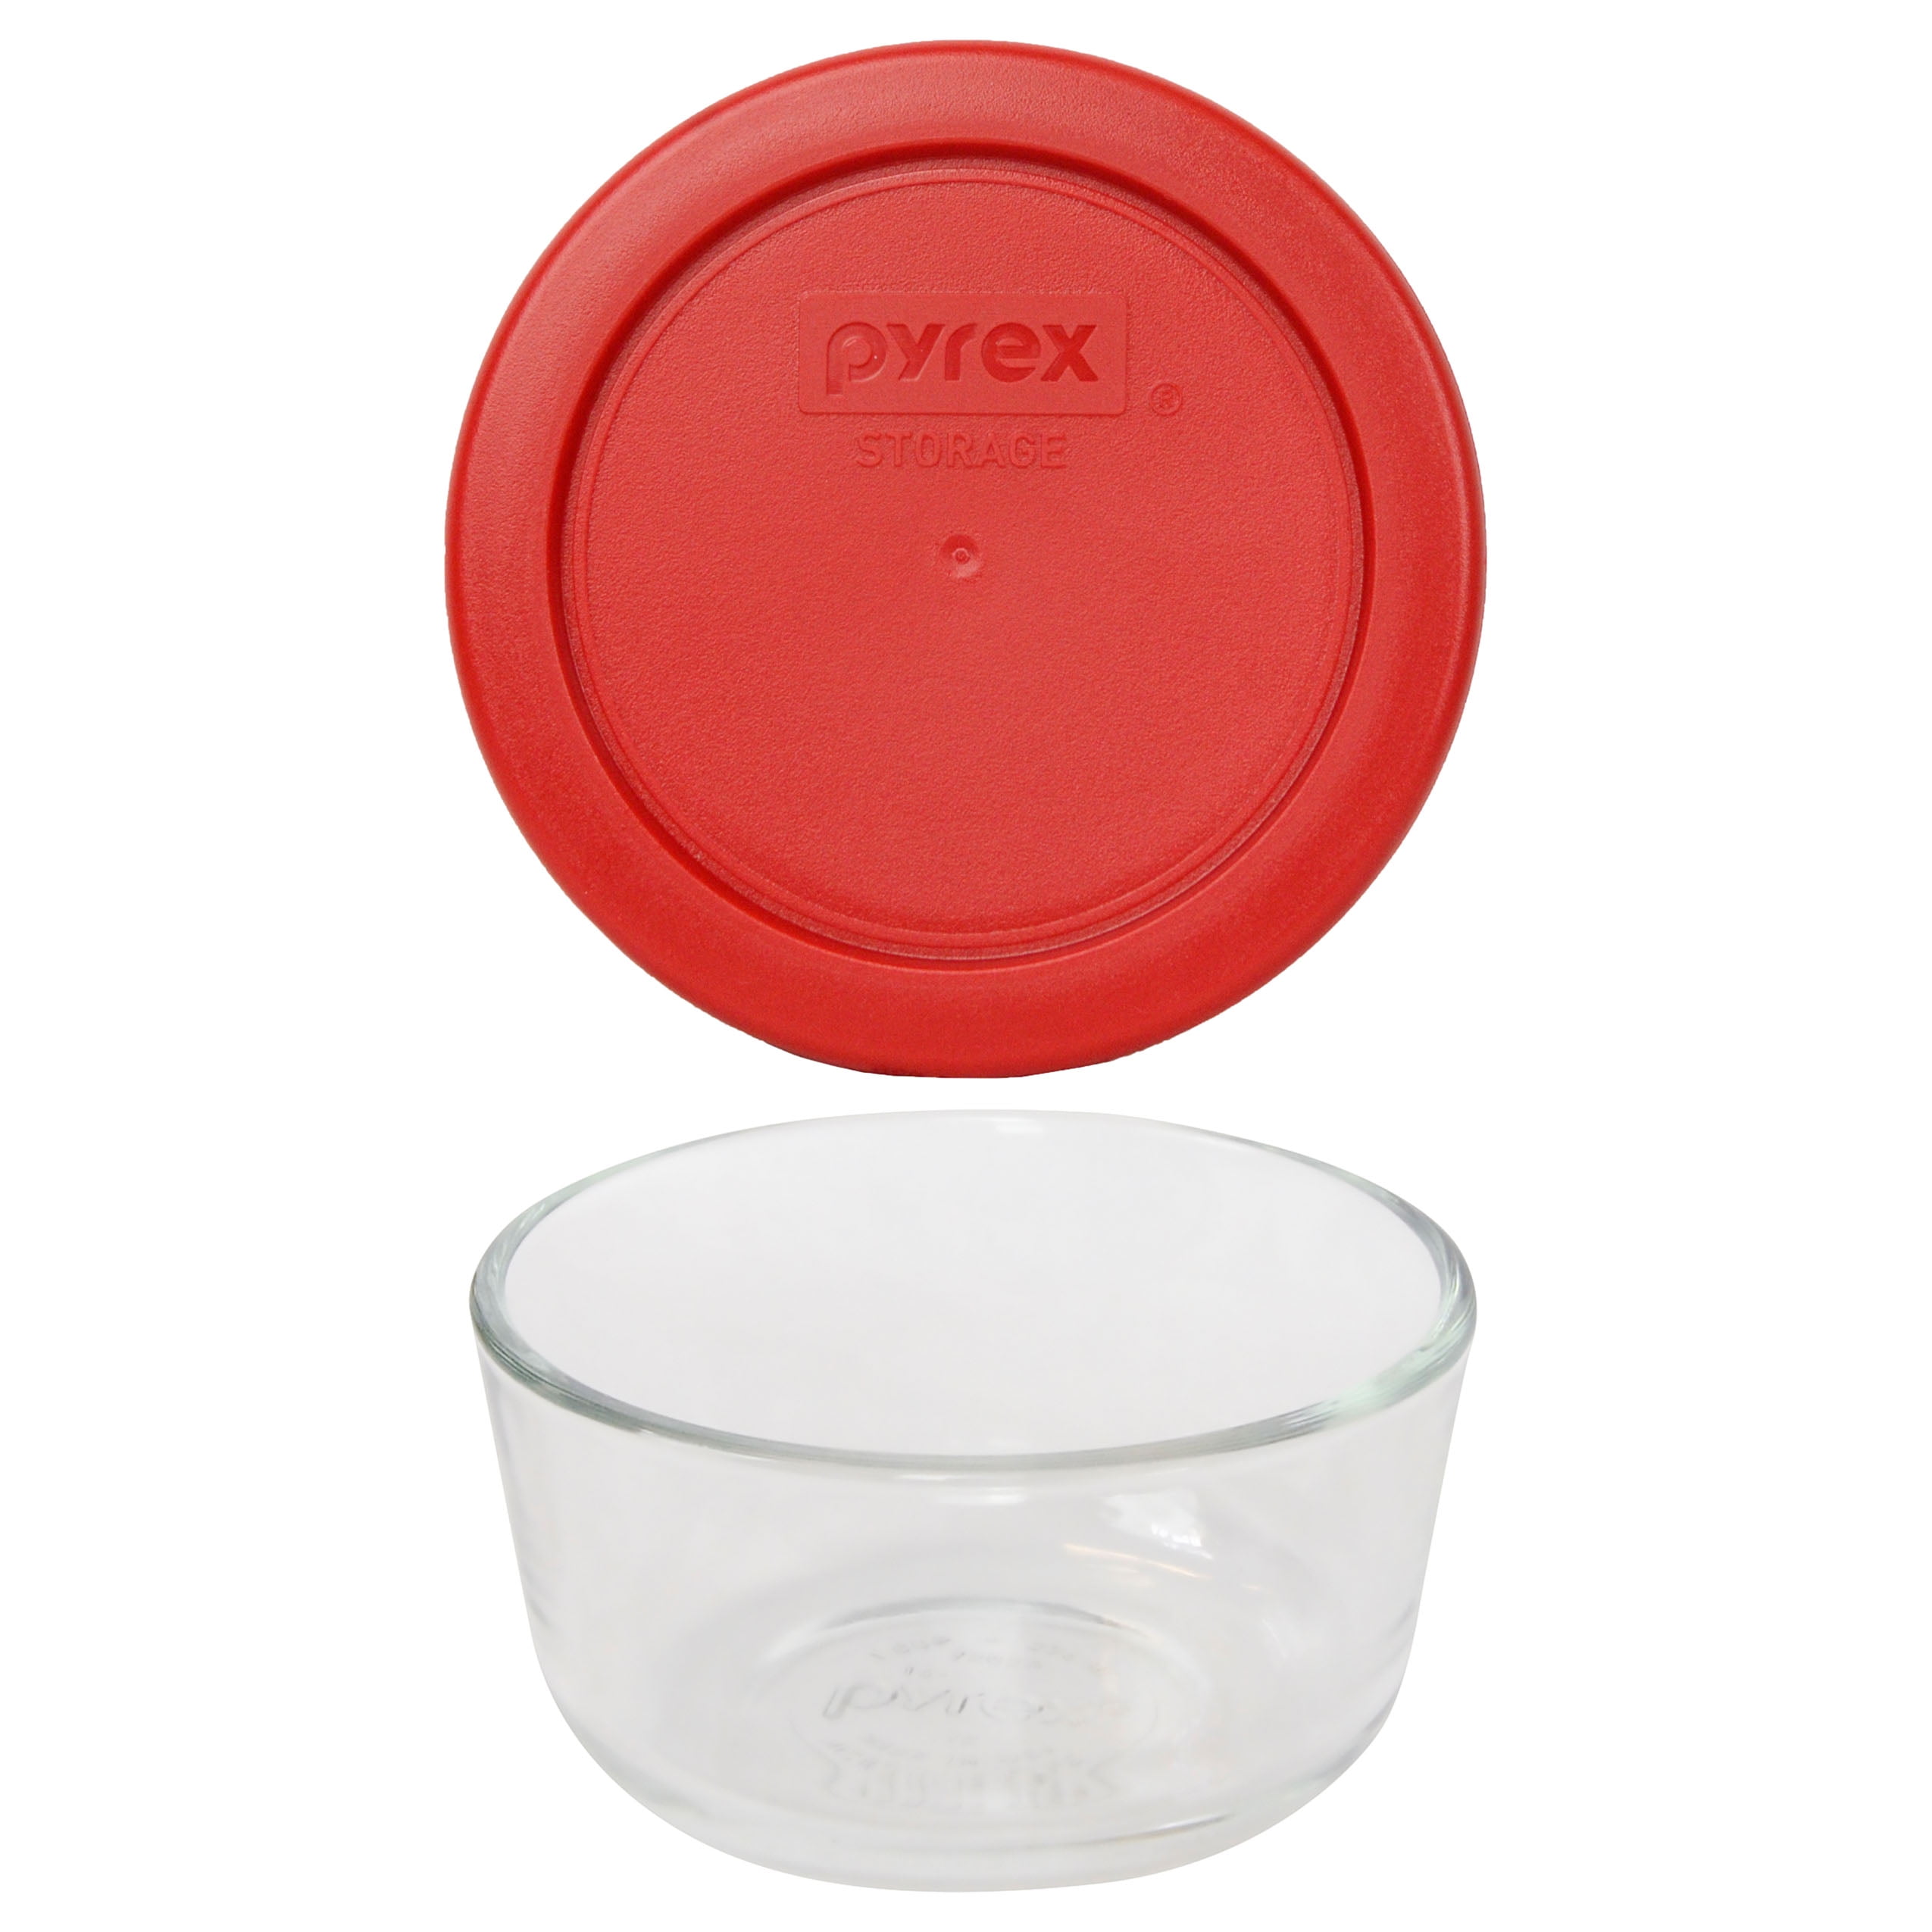 Pyrex (3) 7202 1-Cup Glass Bowls & Holiday Themed Red, White